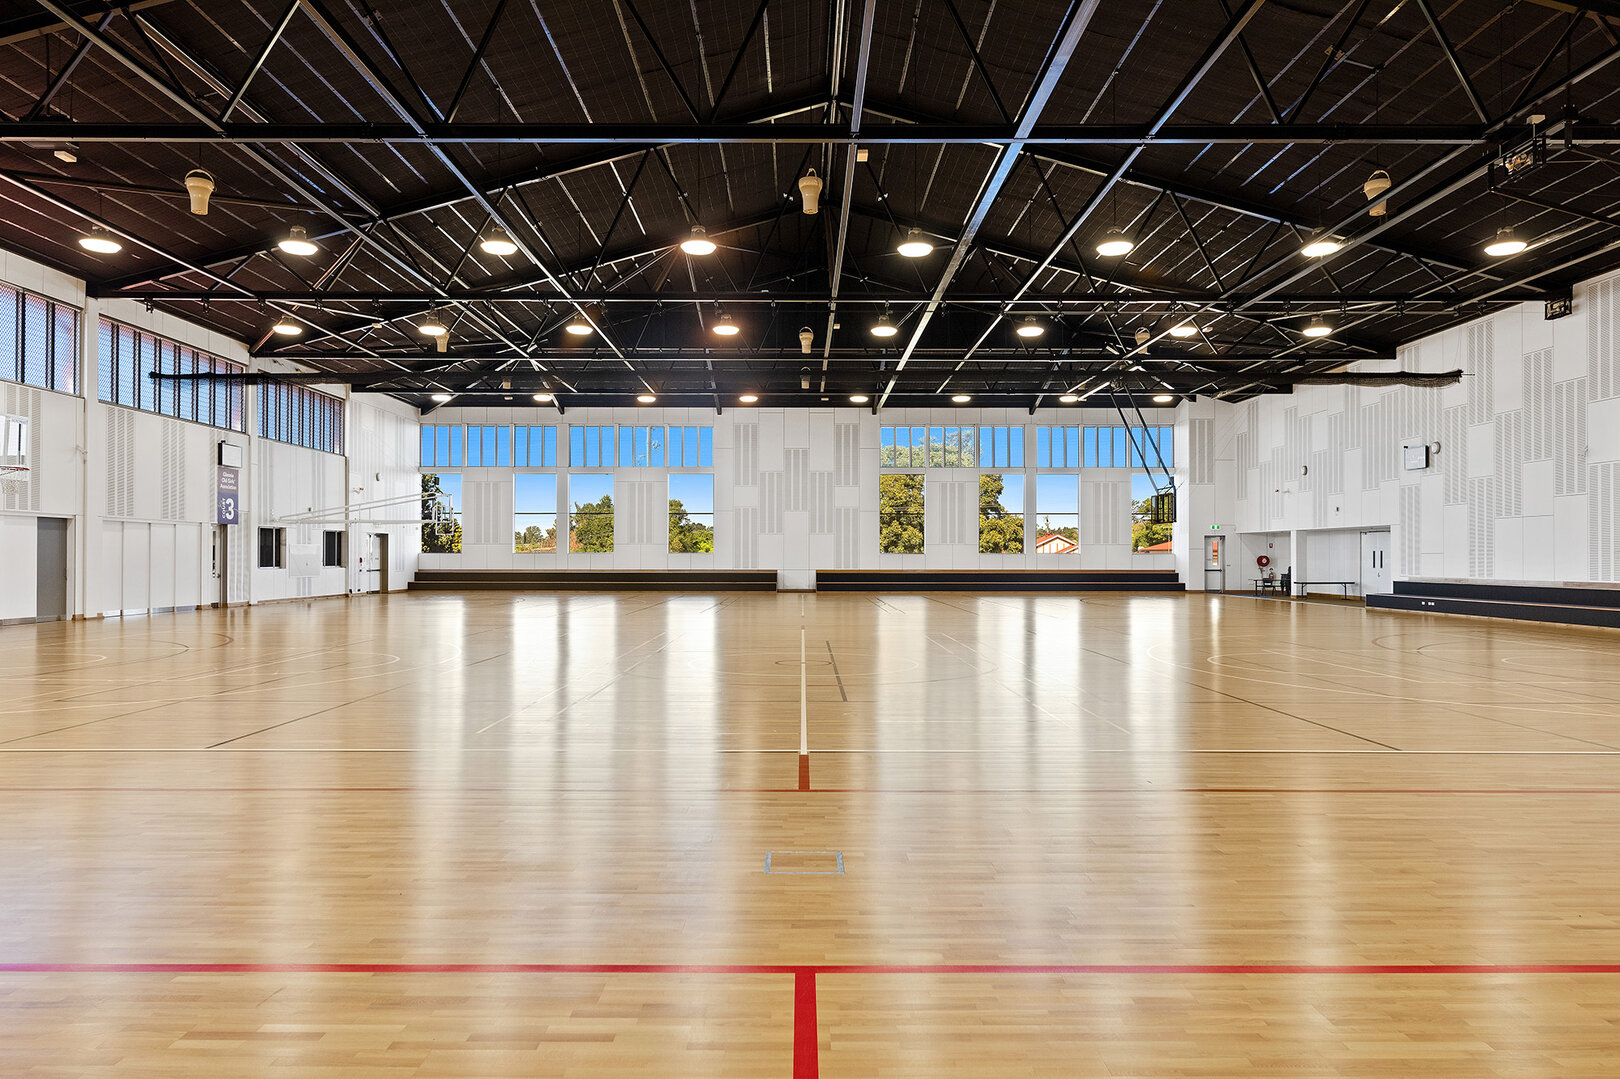 Large indoor sports stadium, brightly lit with overhead lighting and large windows.